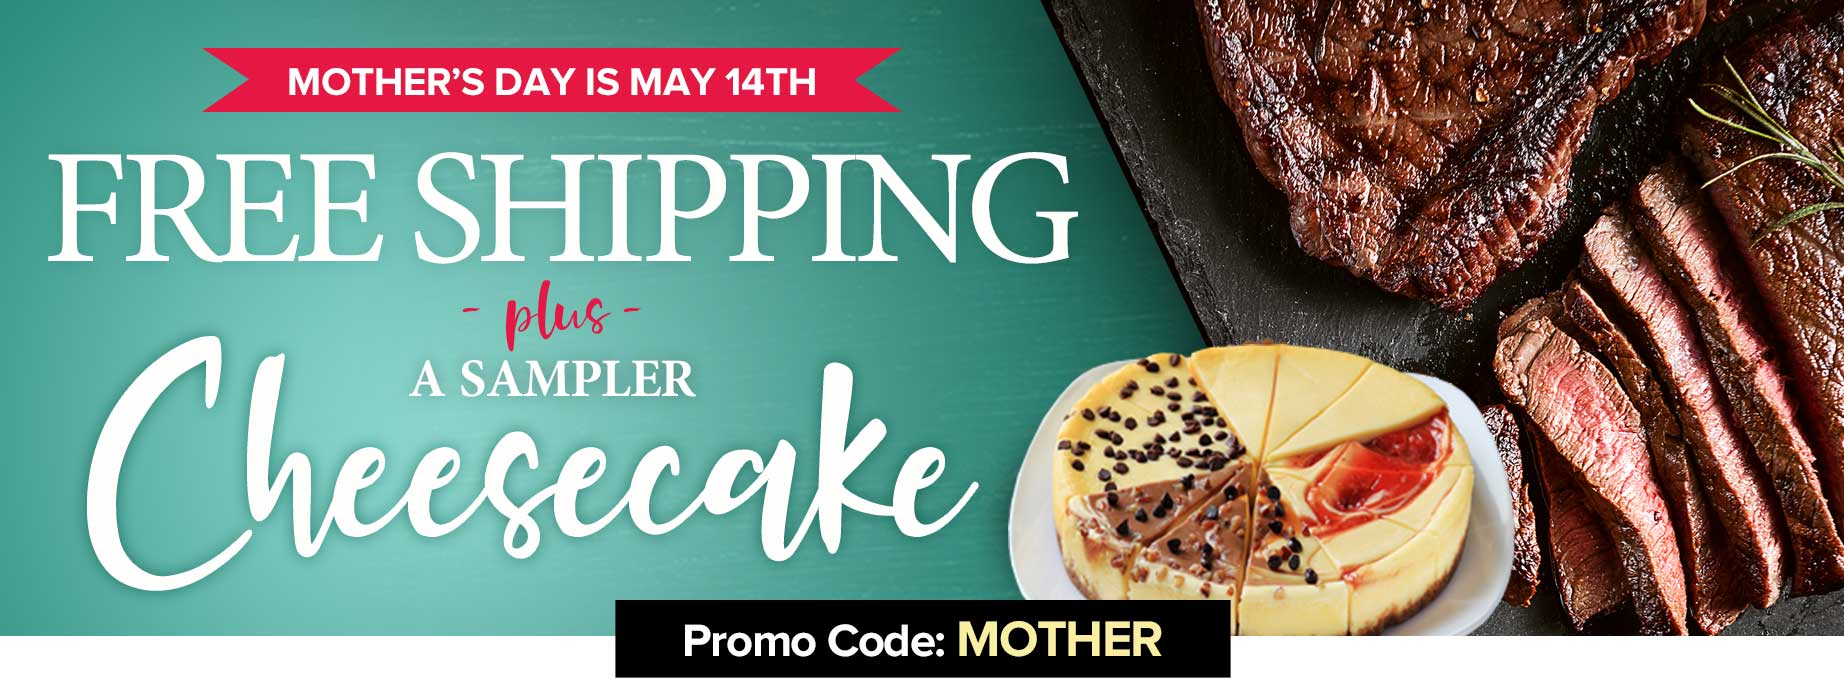 MOTHER'S DAY IS MAY 14TH FREE SHIPPING PLUS A CHEESECAKE SAMPLER & DARK CHOCOLATE PASTRIES PROMO CODE: MOTHER